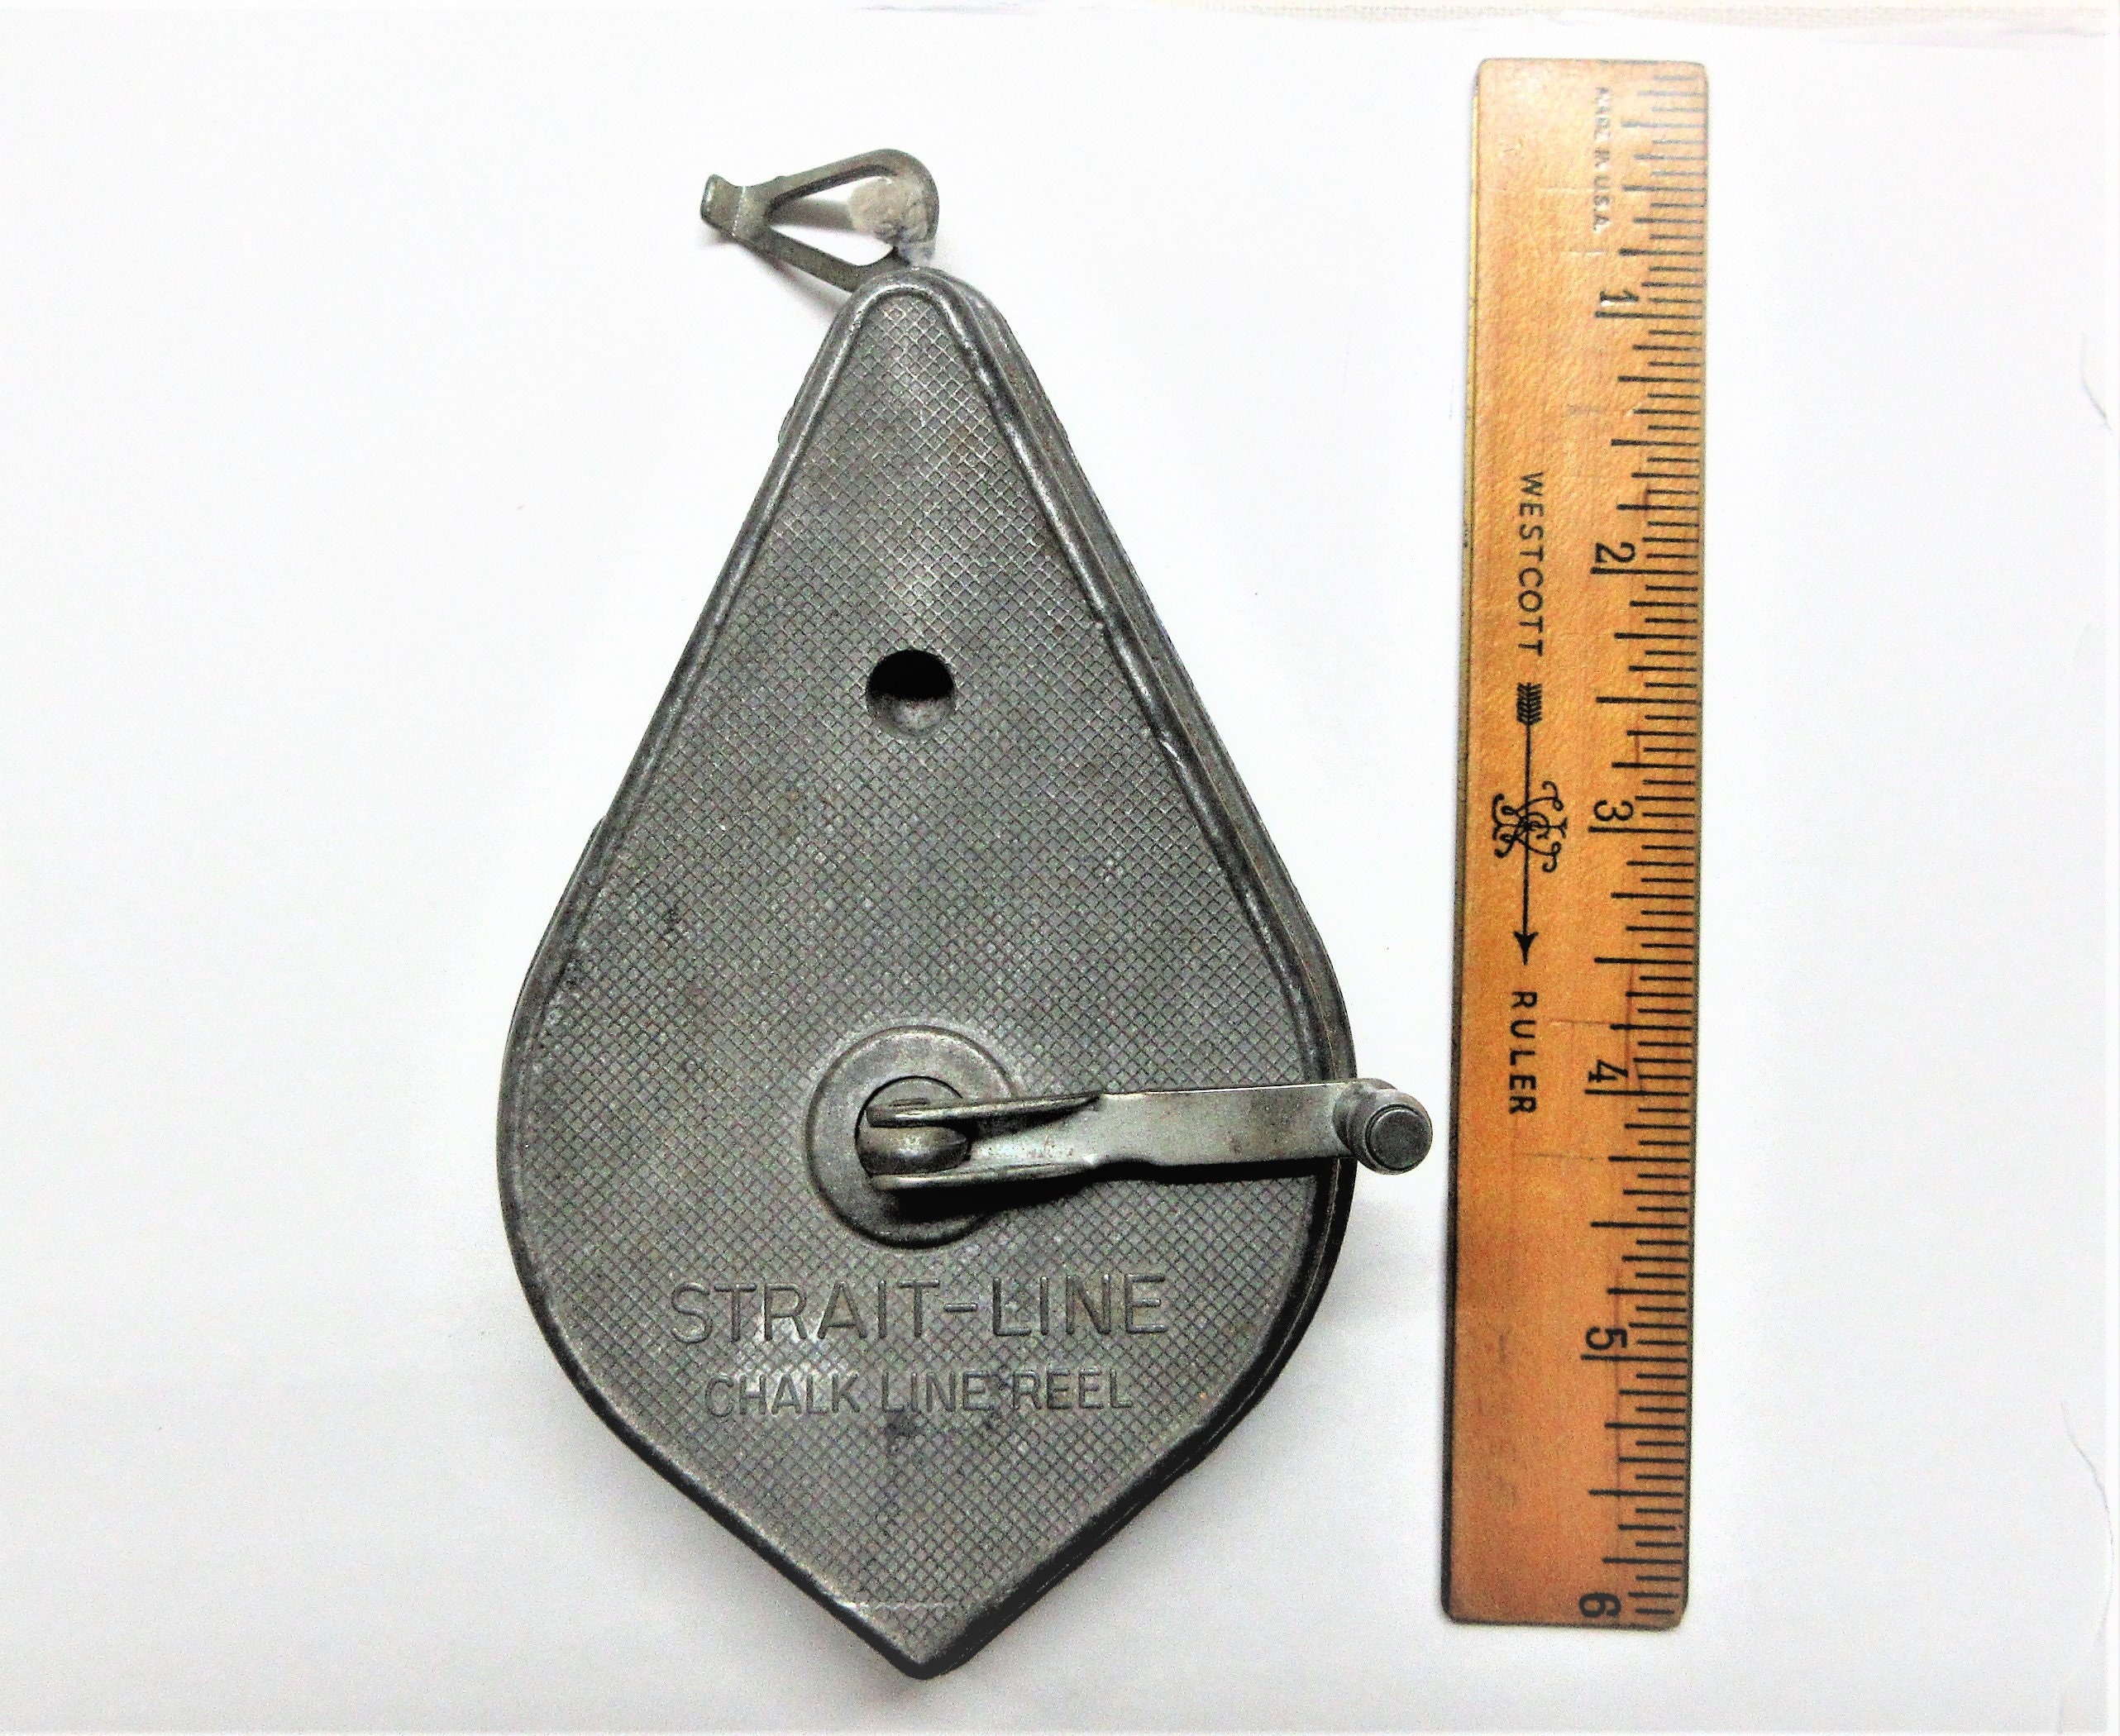 Vintage Irwin Strait-Line plumb bob, chalk line reel. Made in USA. It has  blue chalk in it and is in good used condition